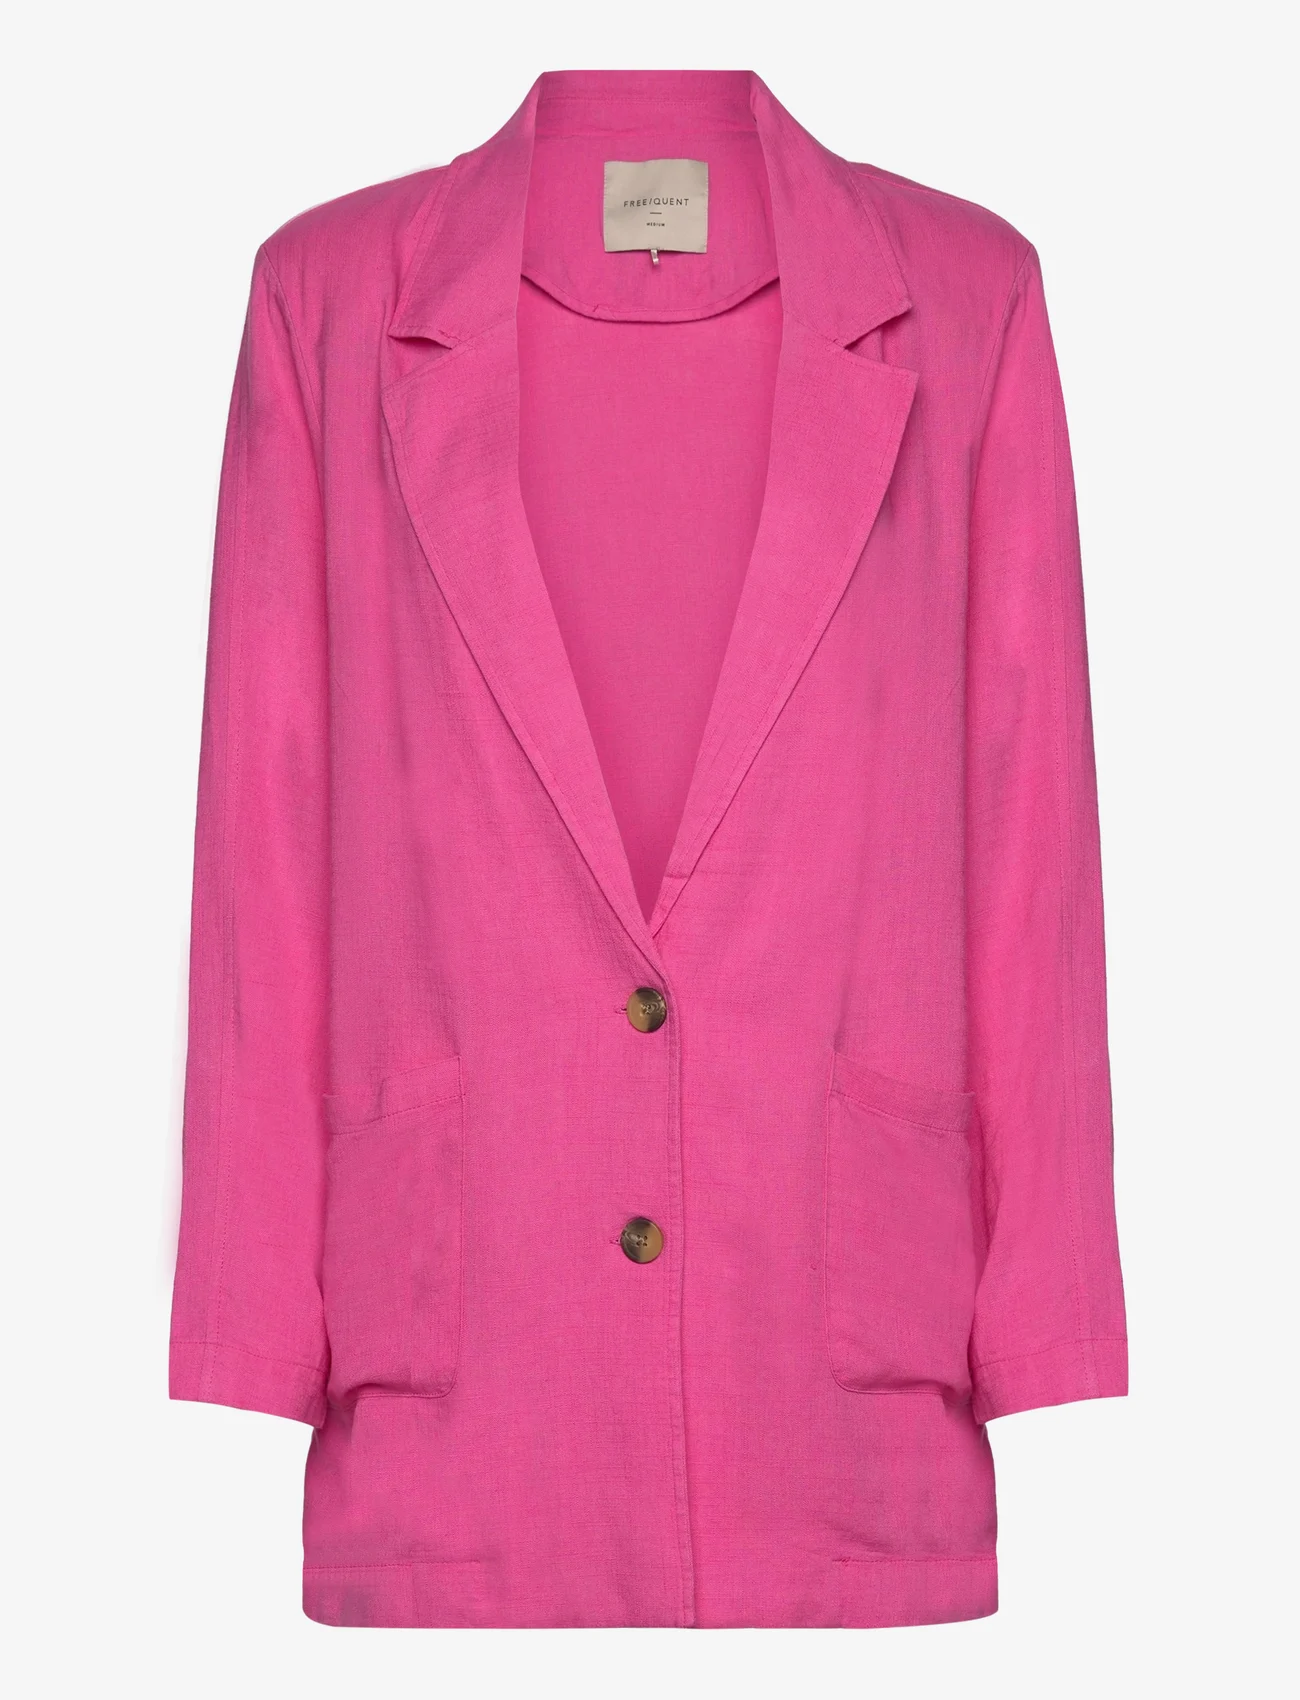 FREE/QUENT - FQLUIGI-JACKET - party wear at outlet prices - carmine rose - 0